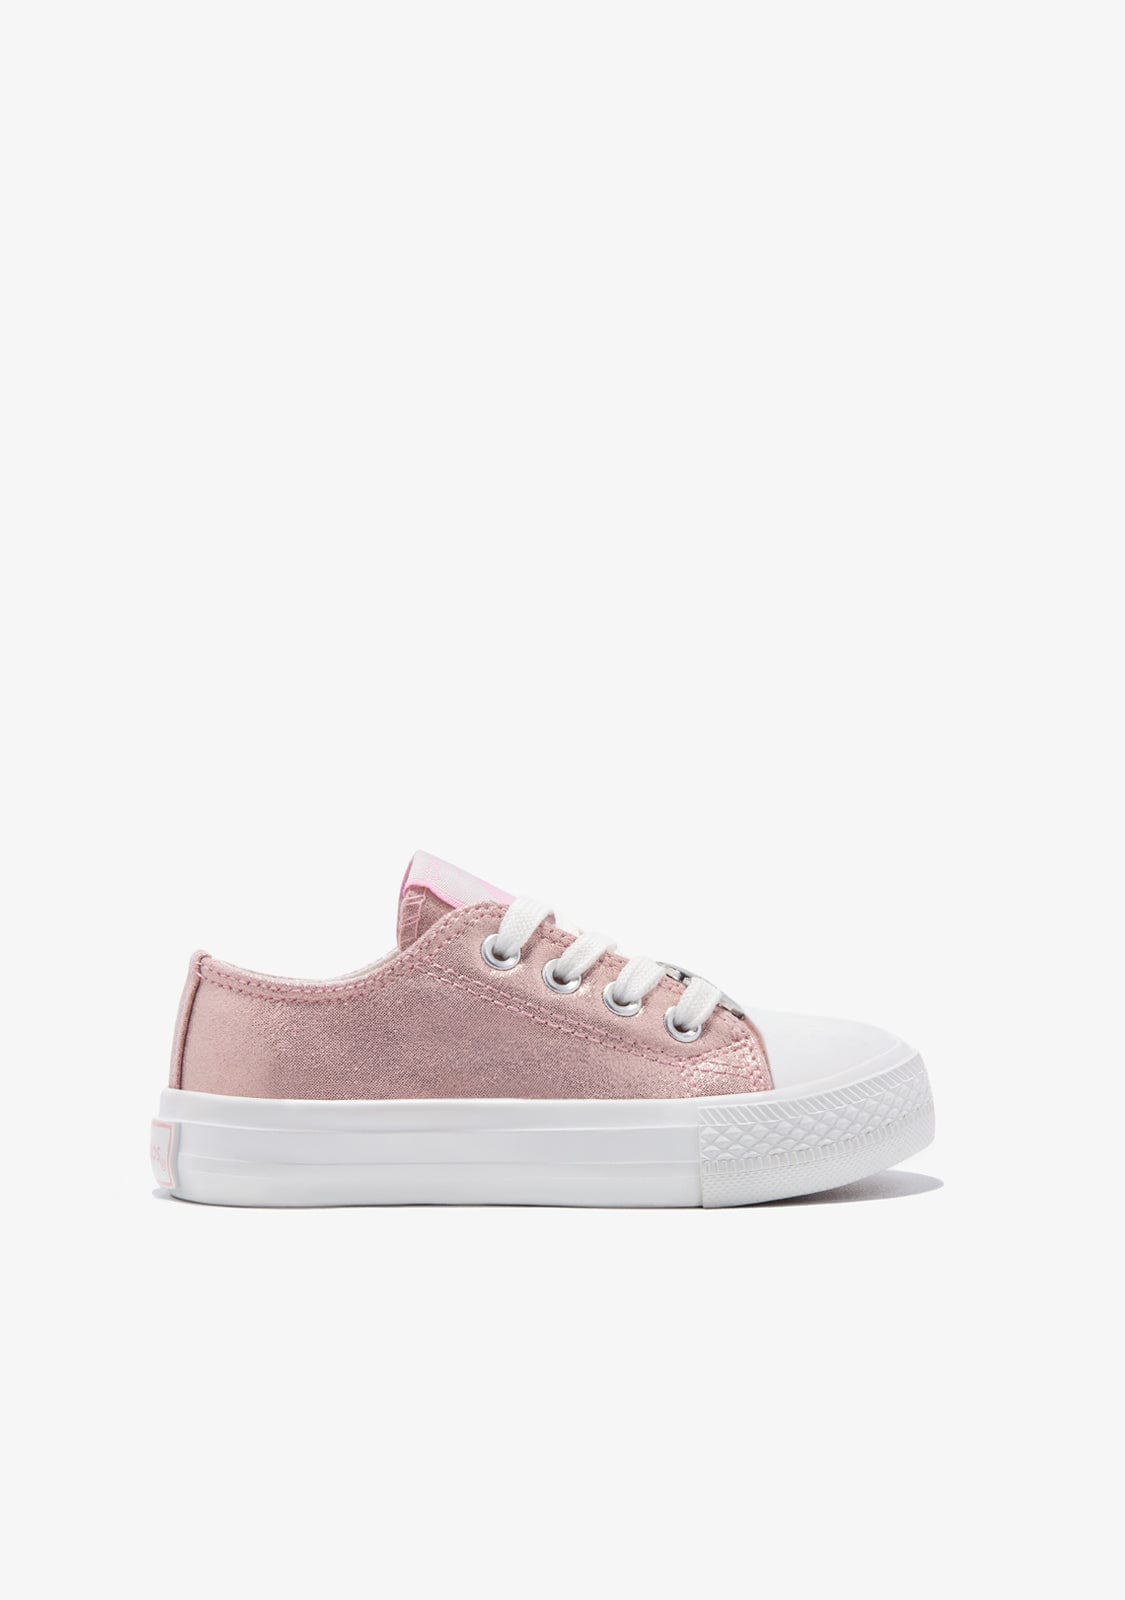 Conguitos BASKET Pink Heart Metallized Canvas Sneakers